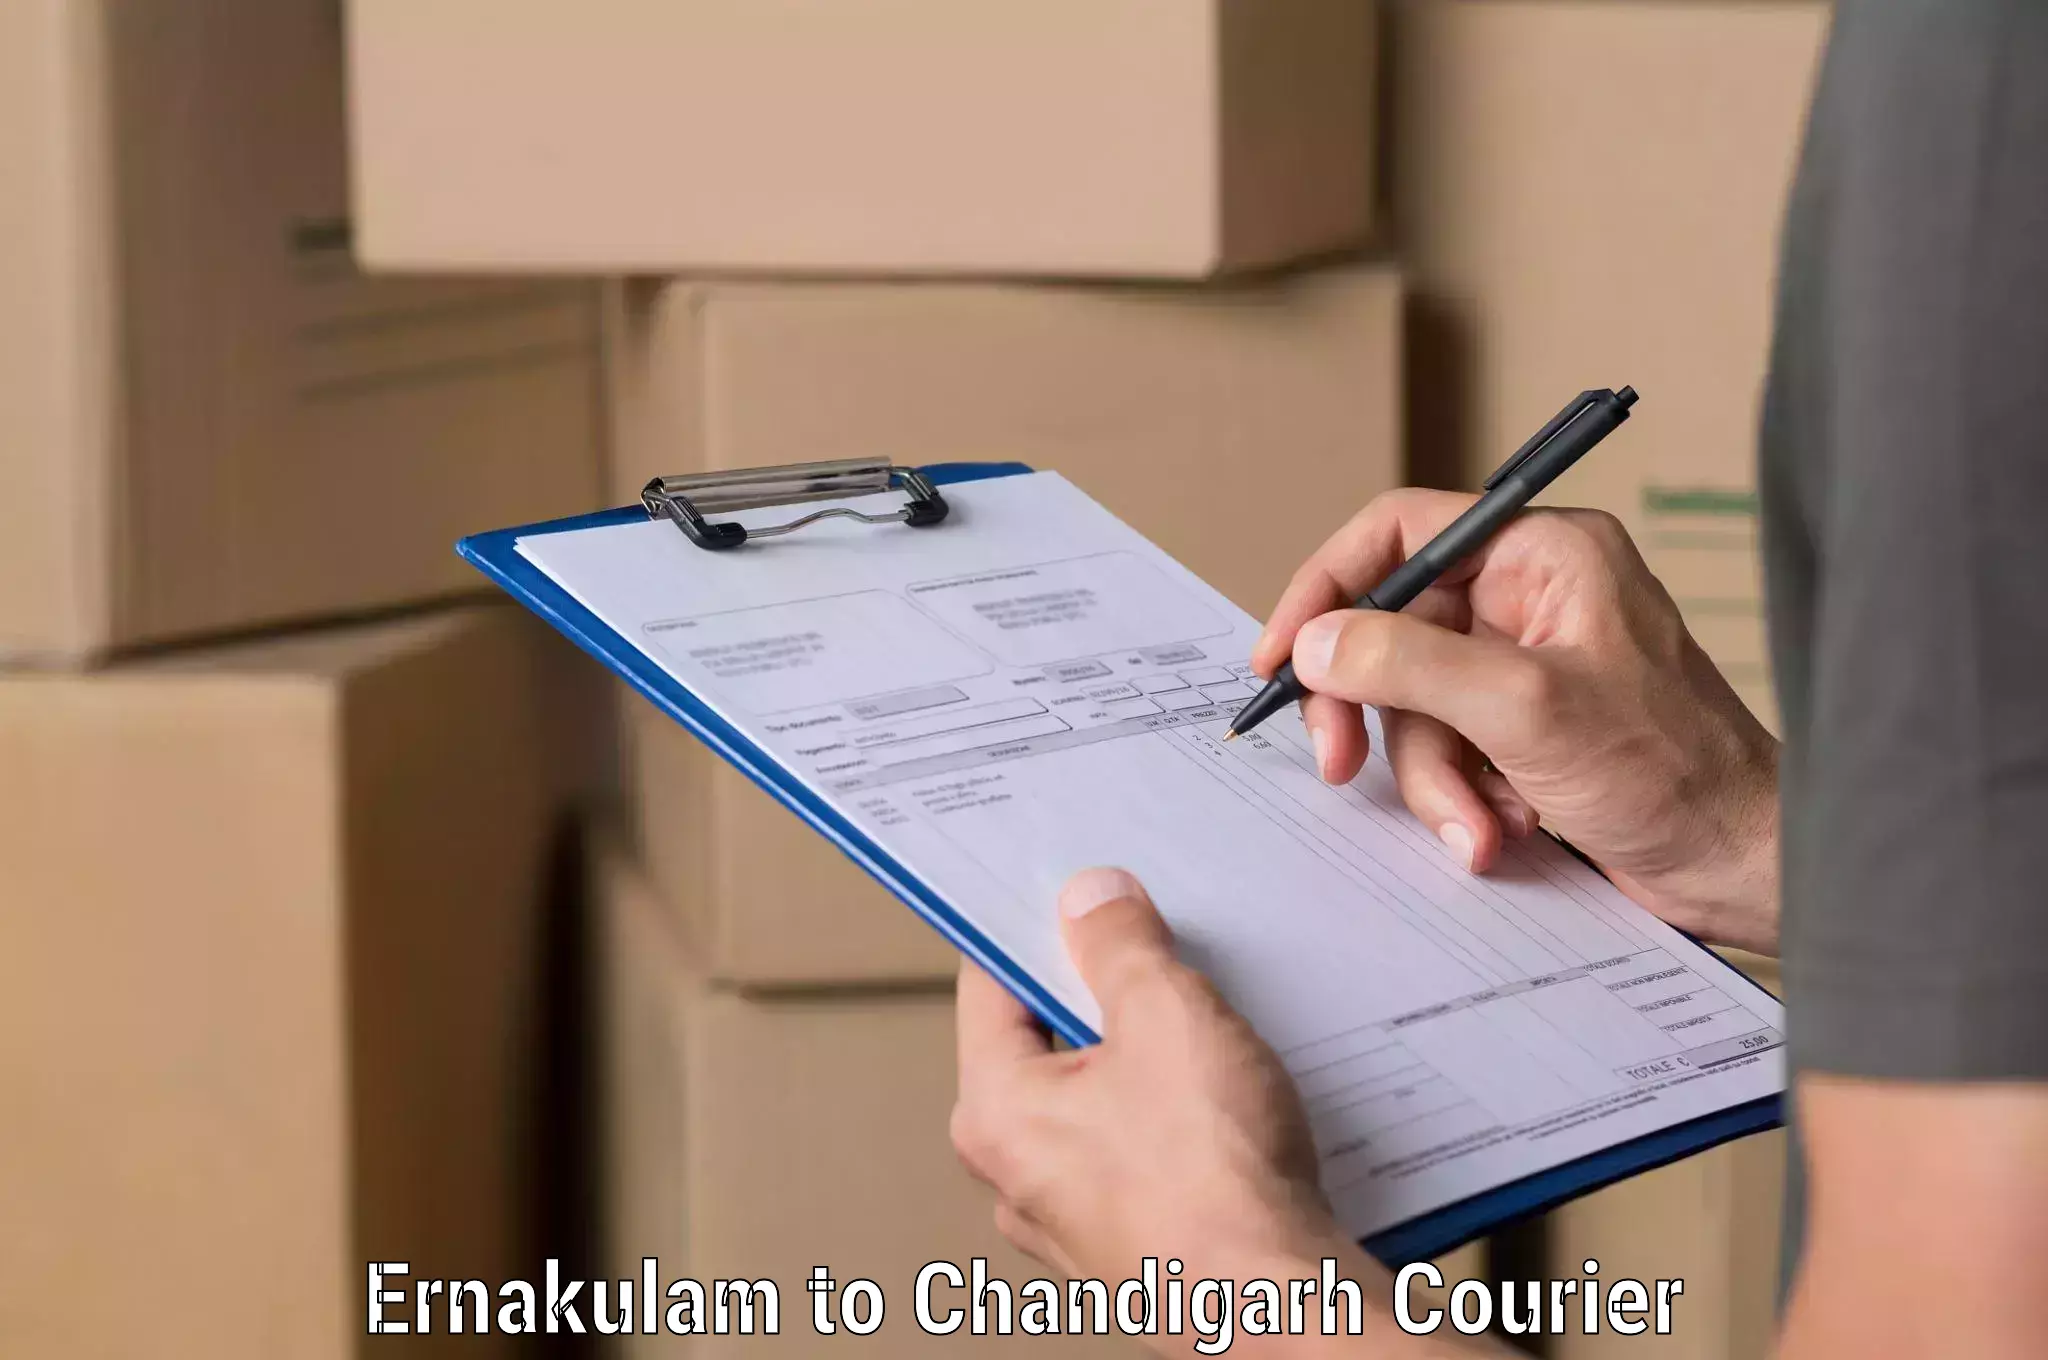 Efficient freight transportation in Ernakulam to Chandigarh